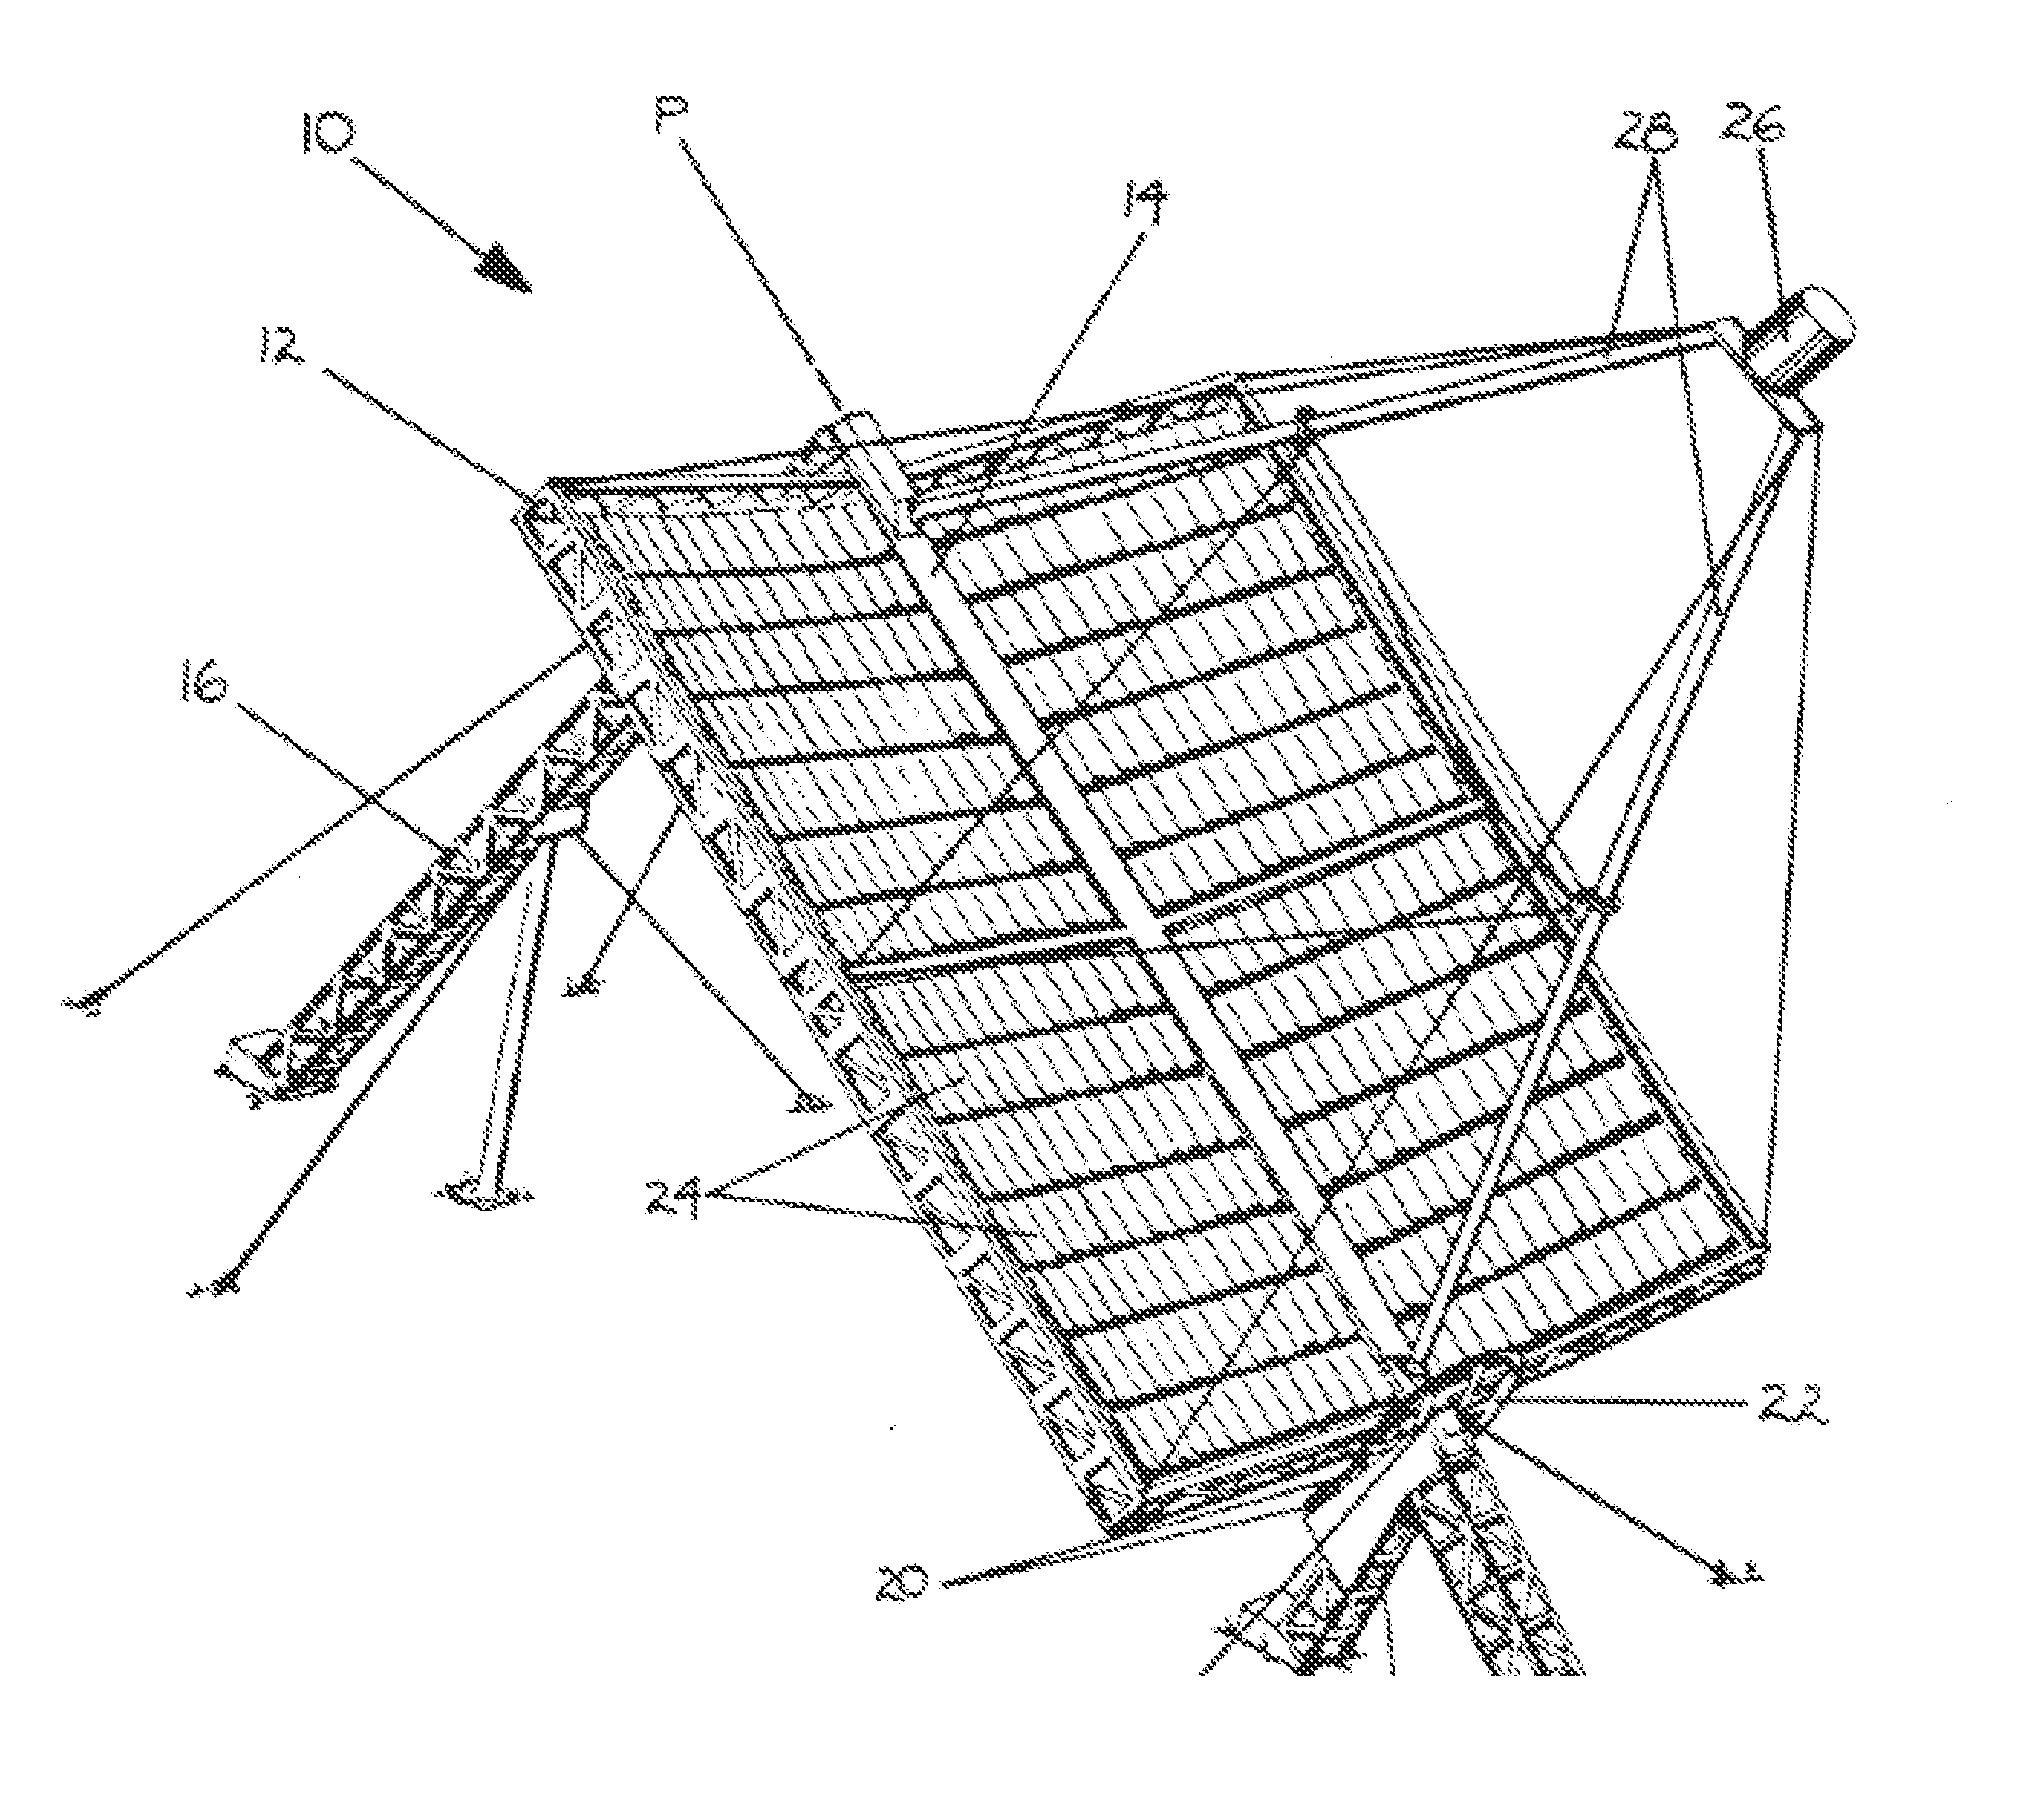 Solar concentrator with induced dipole alignment of pivoted  mirrors